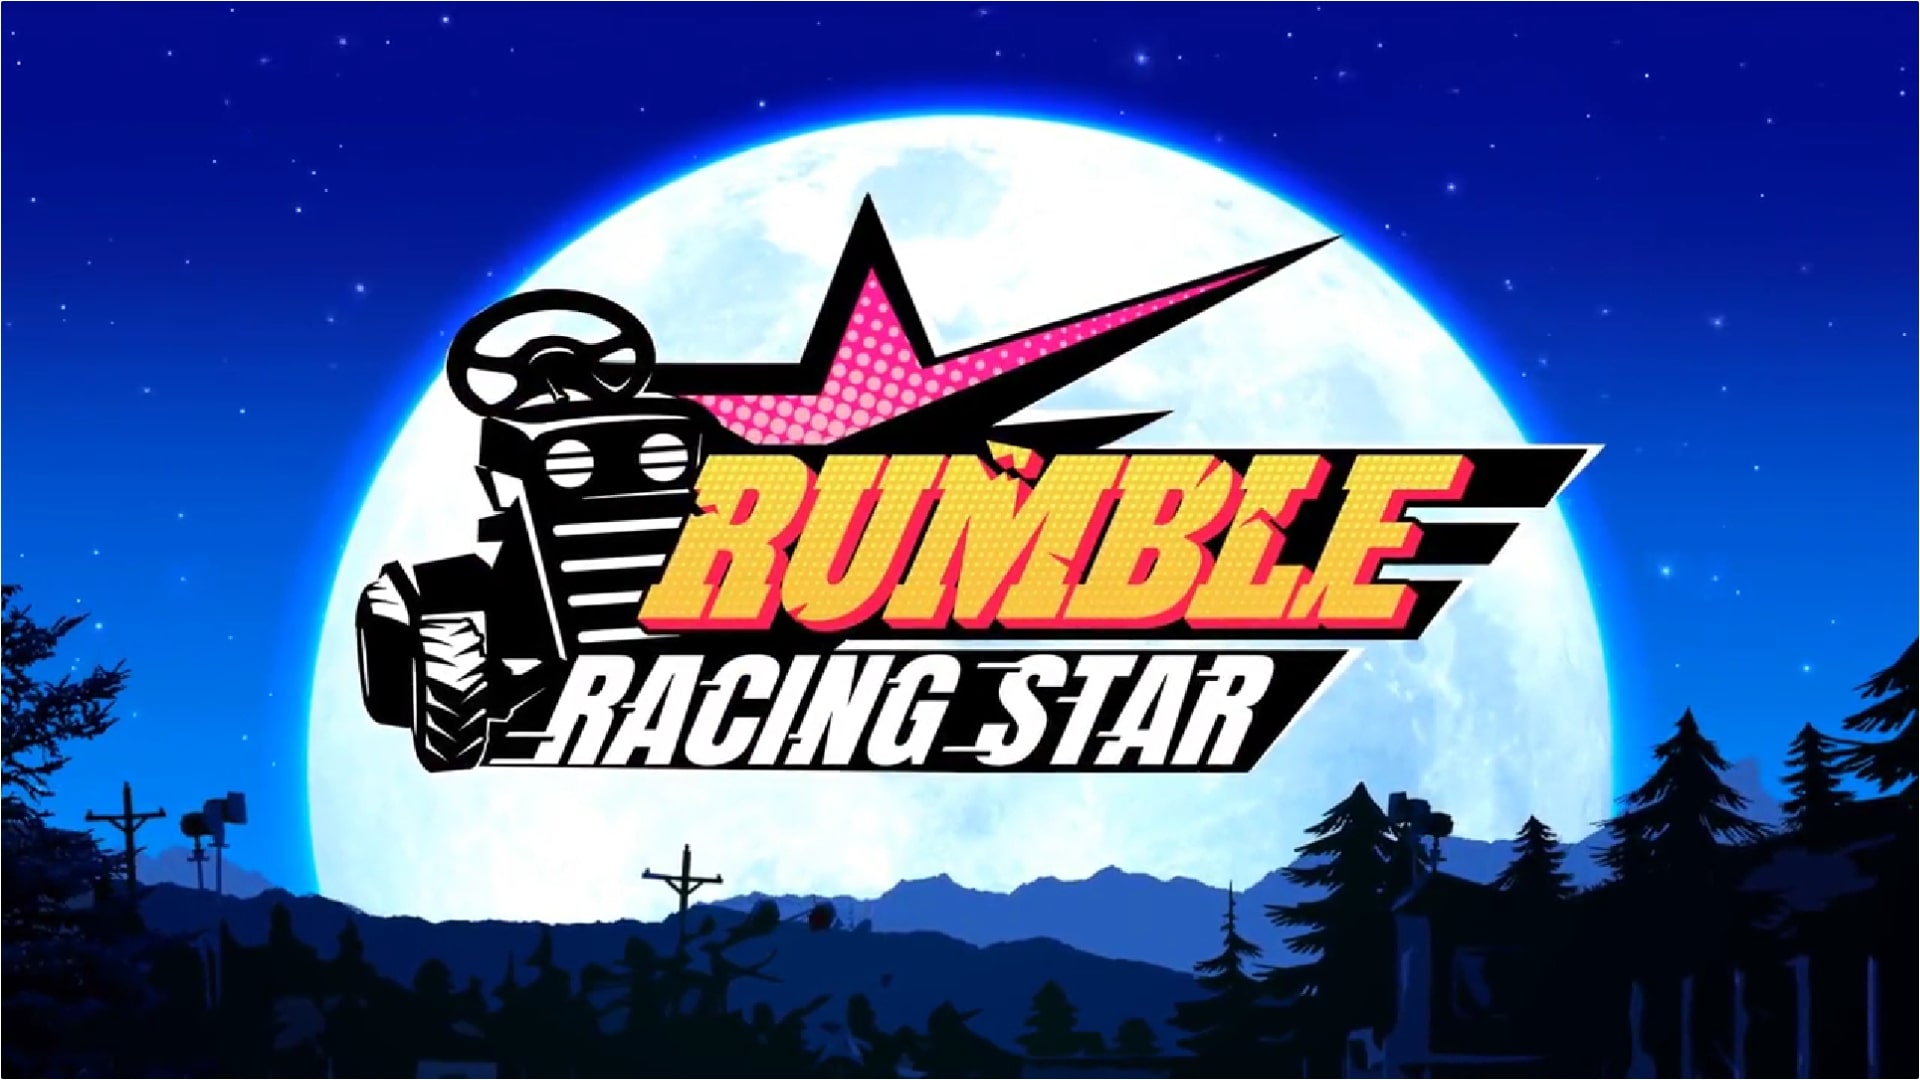 Race on a Lawnmower in "Rumble Racing Star's" Latest Update with New Goodies!